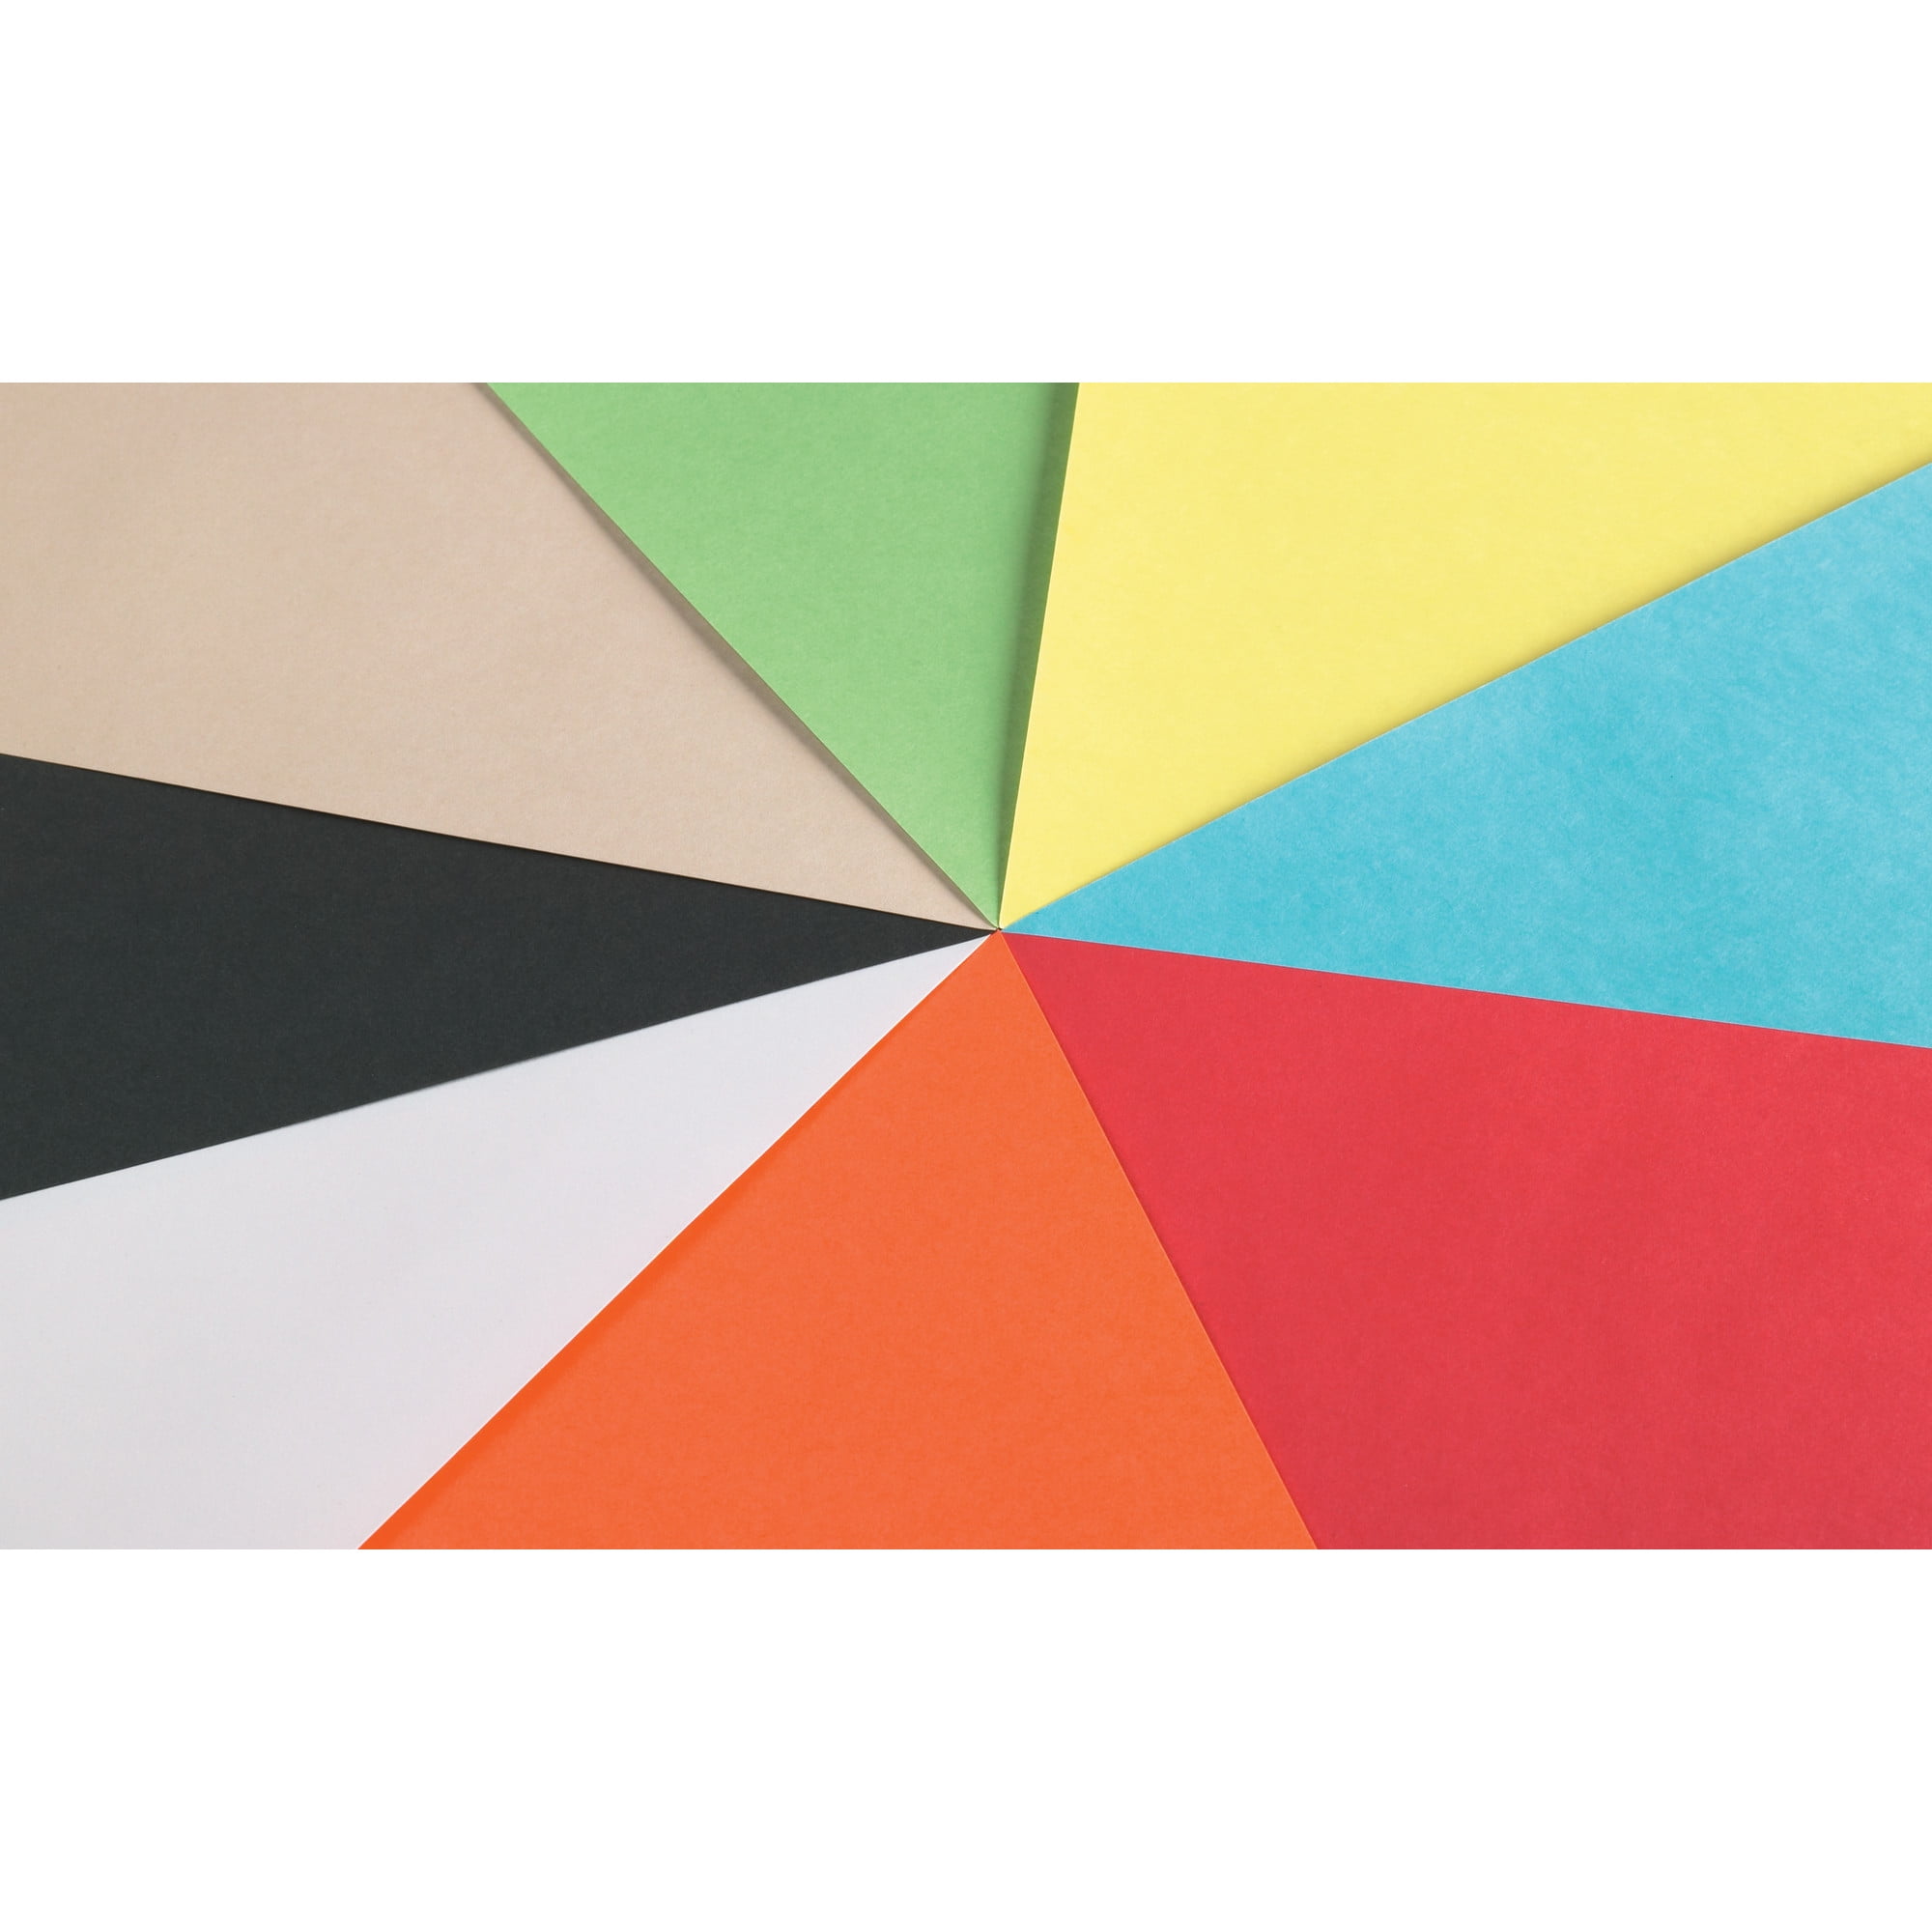 Archival Watercolor Canvas Board 9 in. x 12 in., each (pack of 2) 